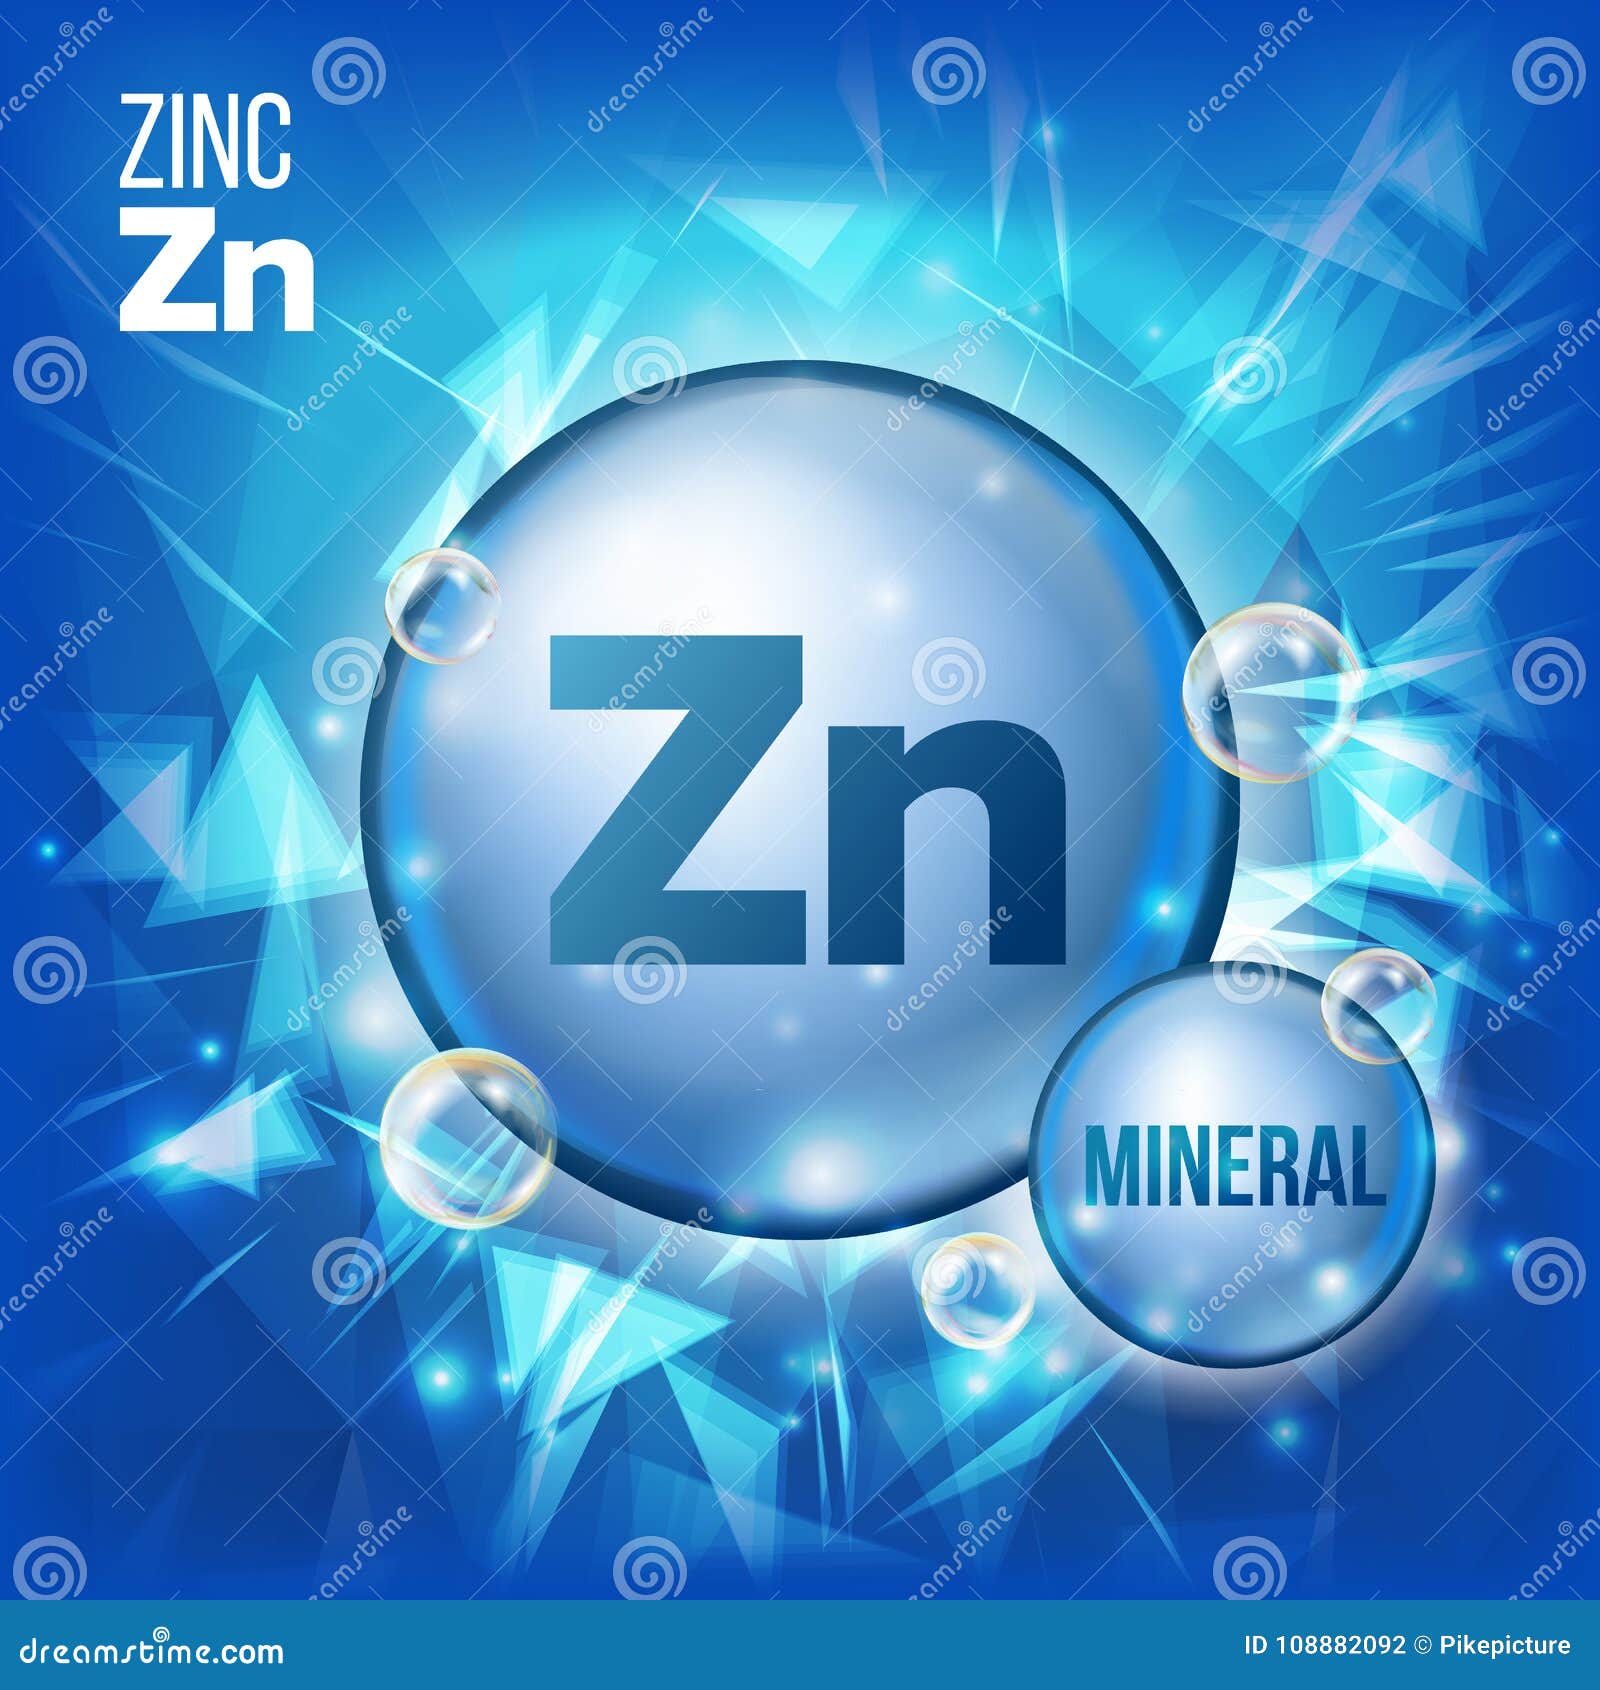 zn zinc . mineral blue pill icon. vitamin capsule pill icon. substance for beauty, cosmetic, heath promo ads